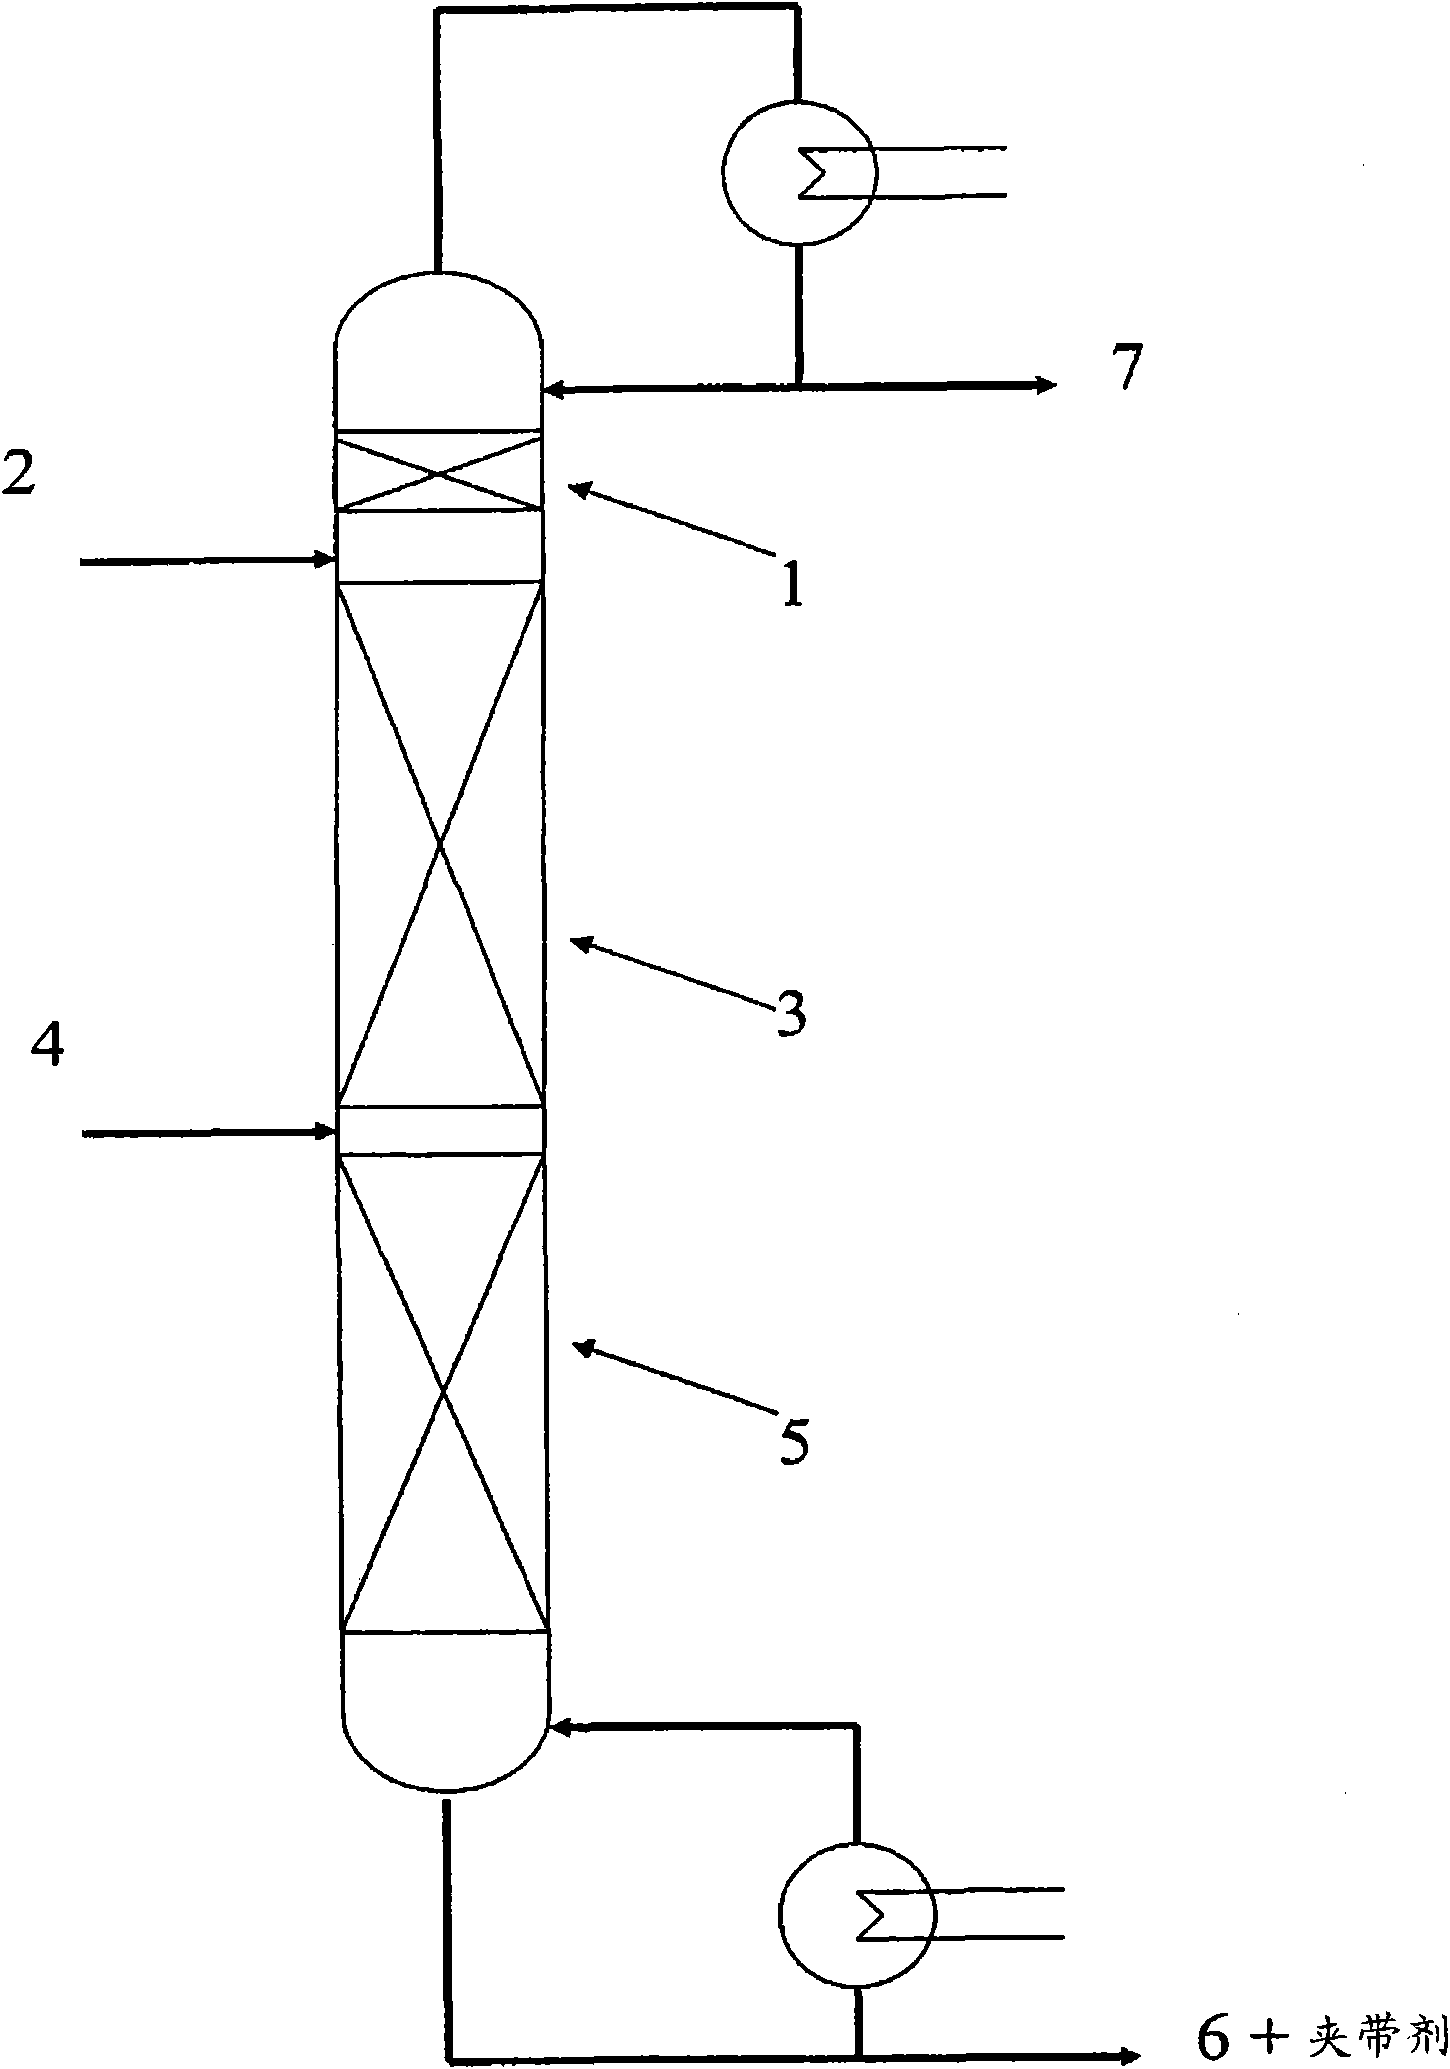 Process for the separation of fluorocarbons using ionic liquids